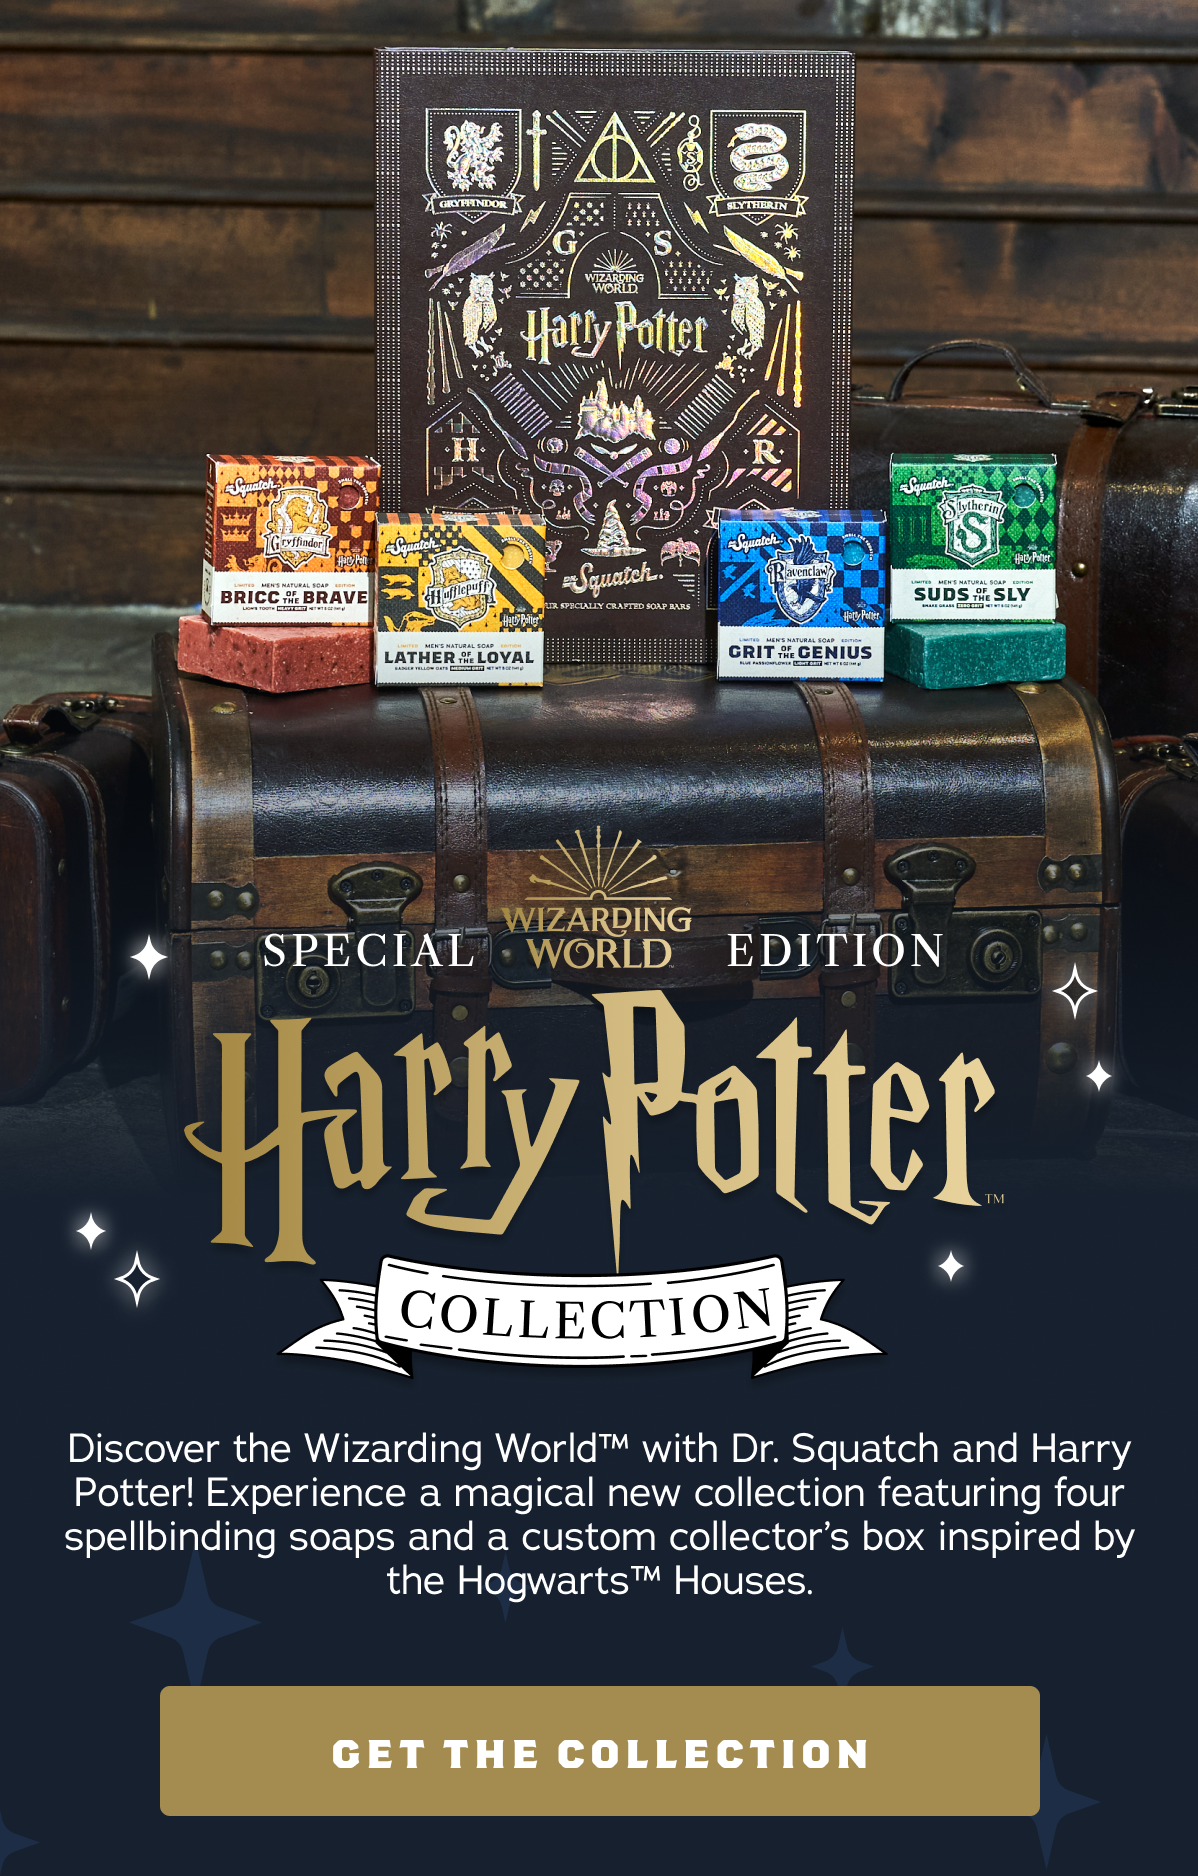 DR. SQUATCH HARRY POTTER COLLECTION - The Pop Insider